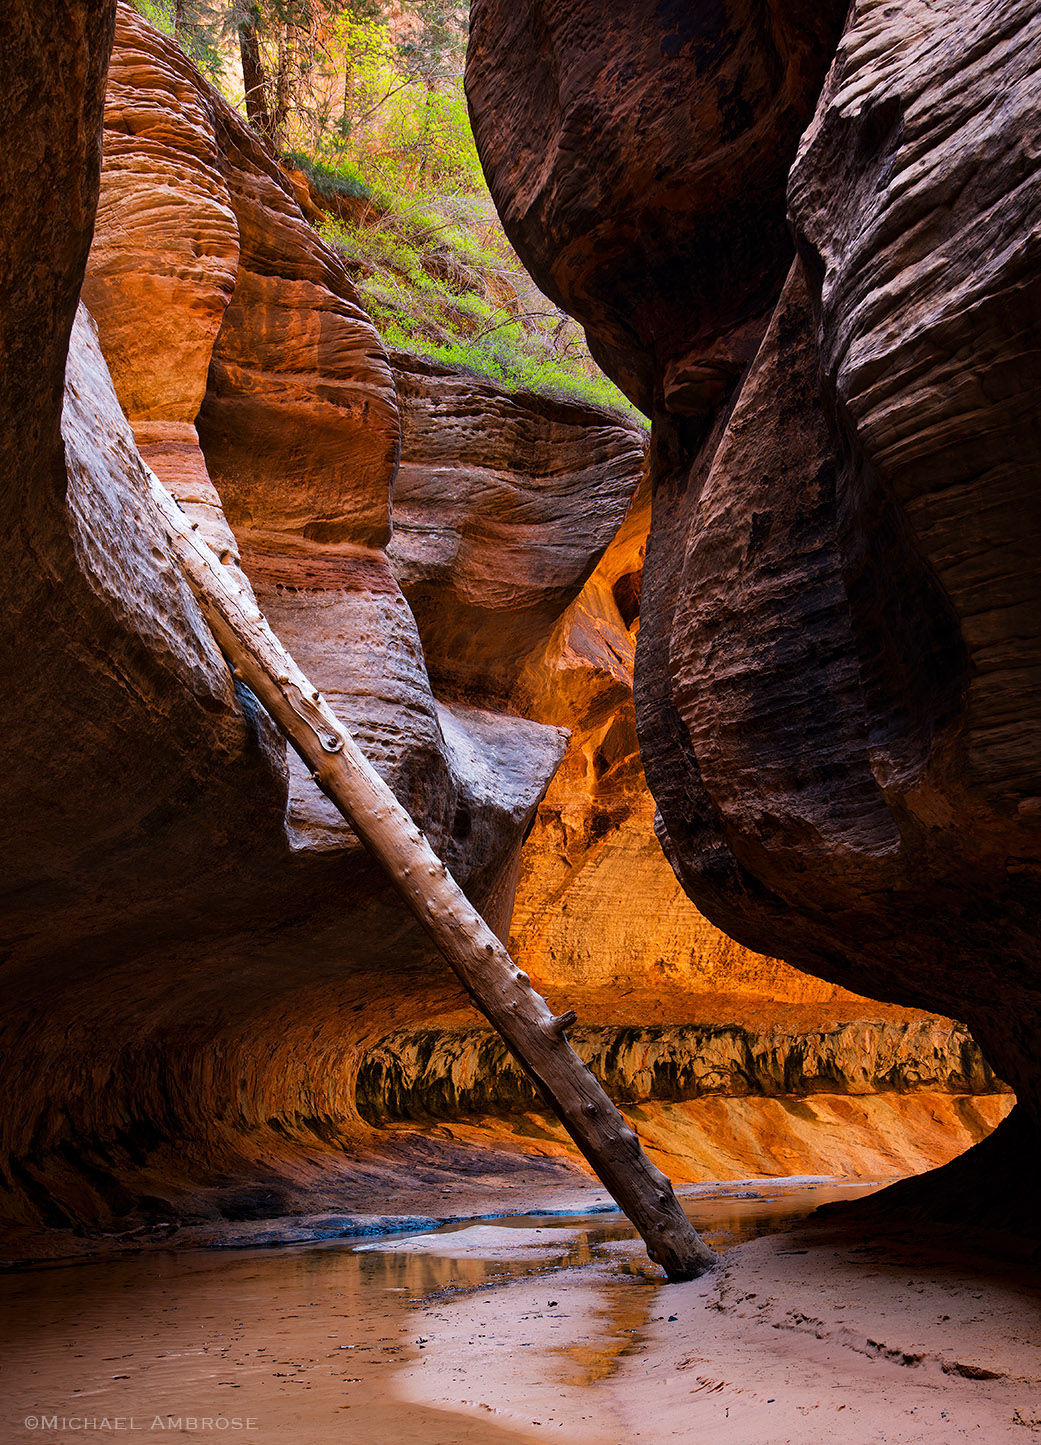 Deep into the subway section of Left Fork, light glows in the wildly popular slot canyon that draws hikers and canyoneers.